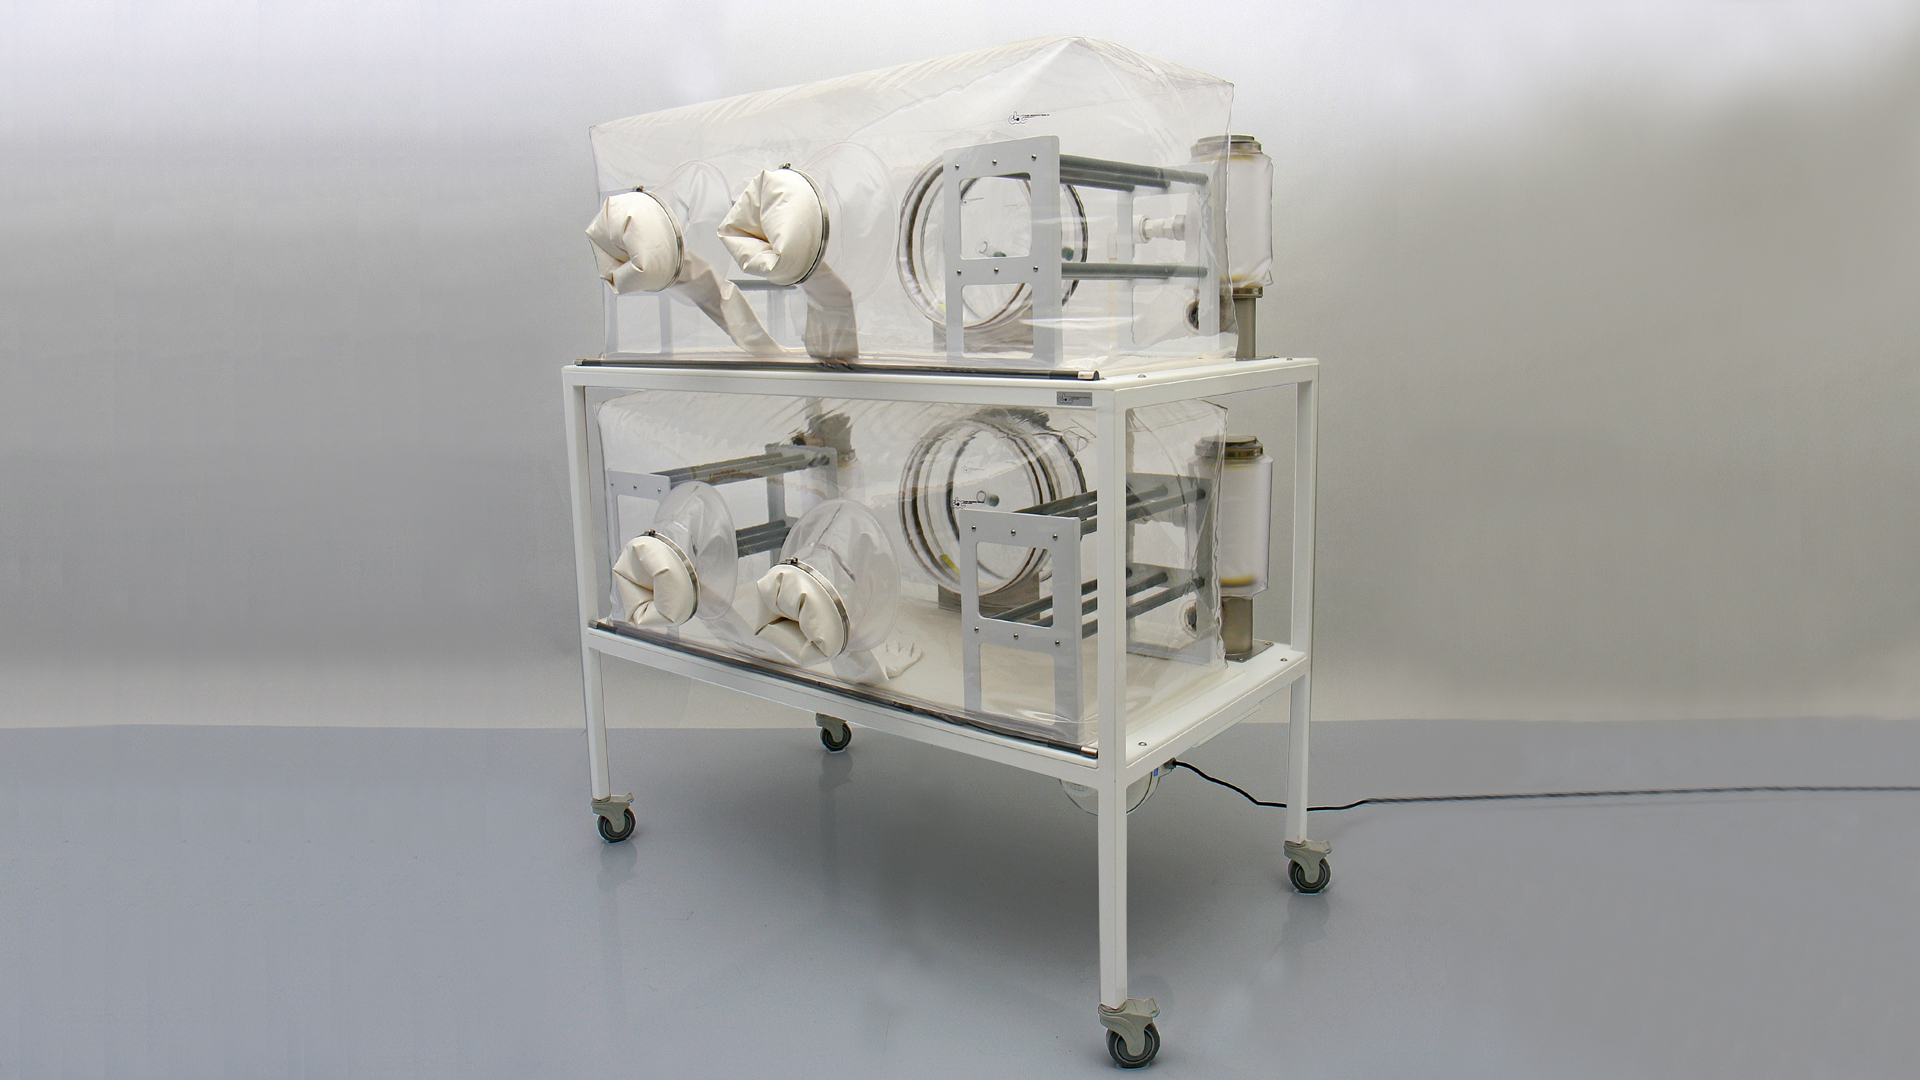 CBC's double-tier flexible film isolator starter lab for germ-free, gnotobiotic mice or other rodents.